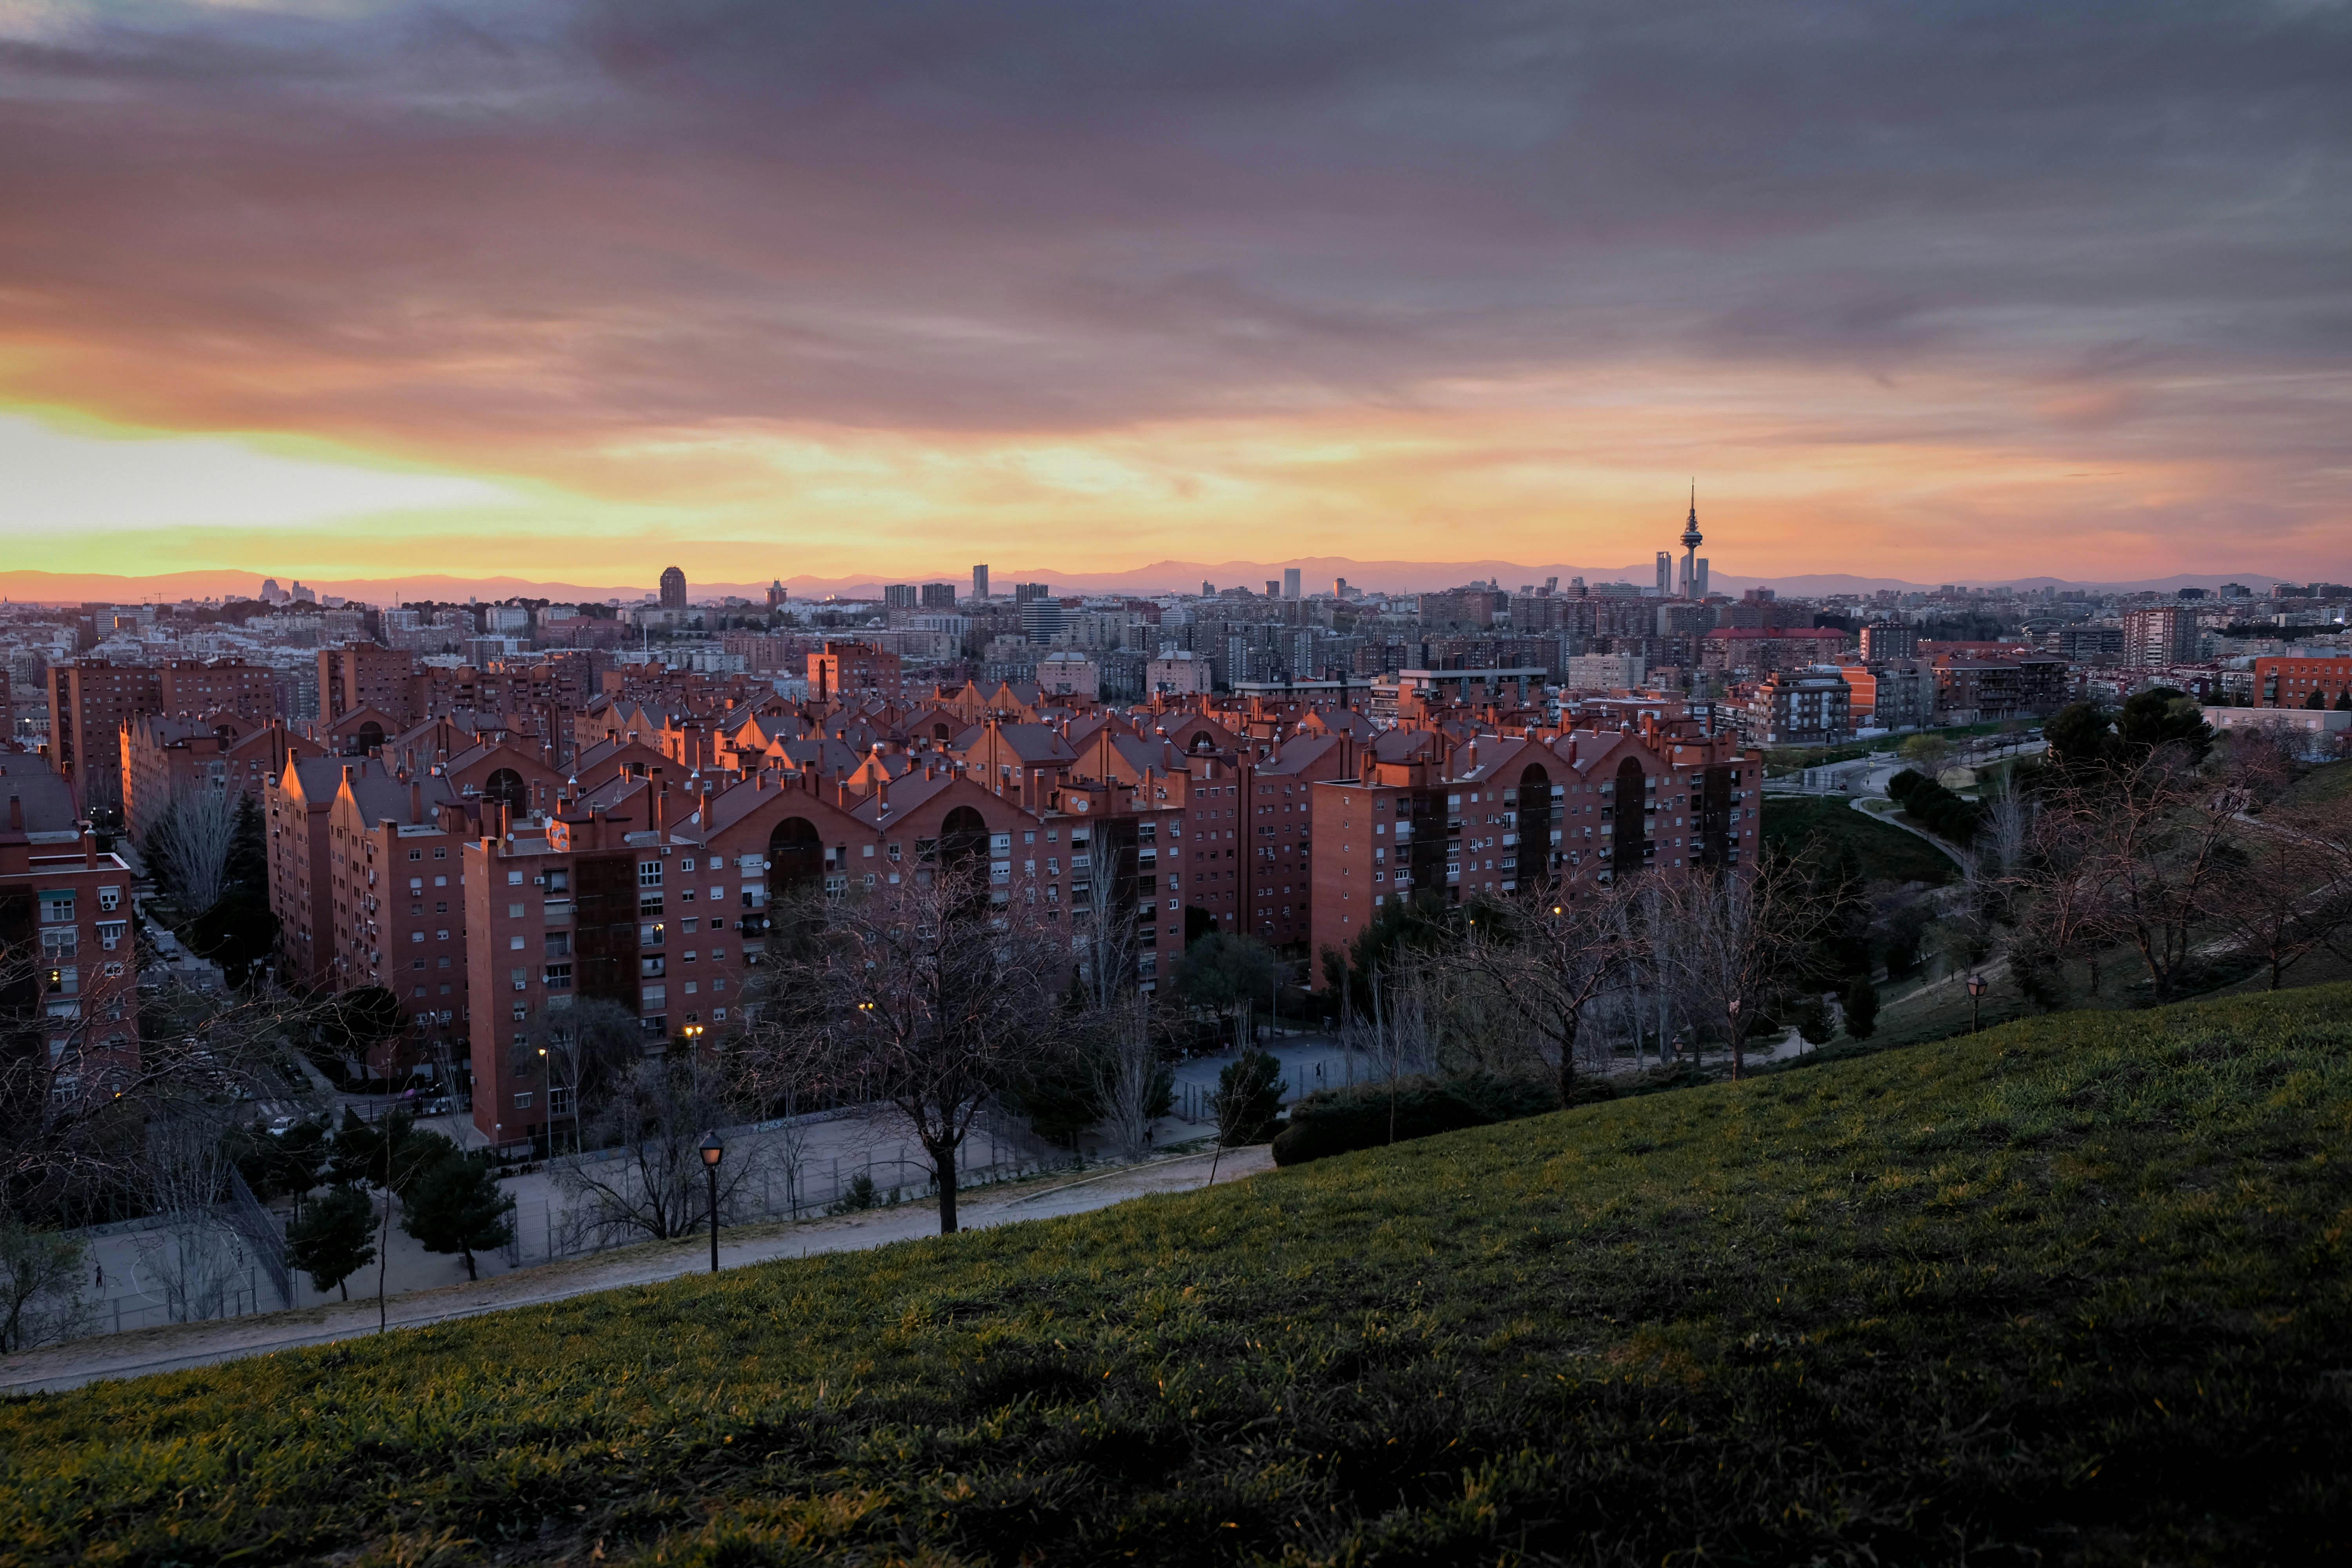 photograph of buildings in madrid